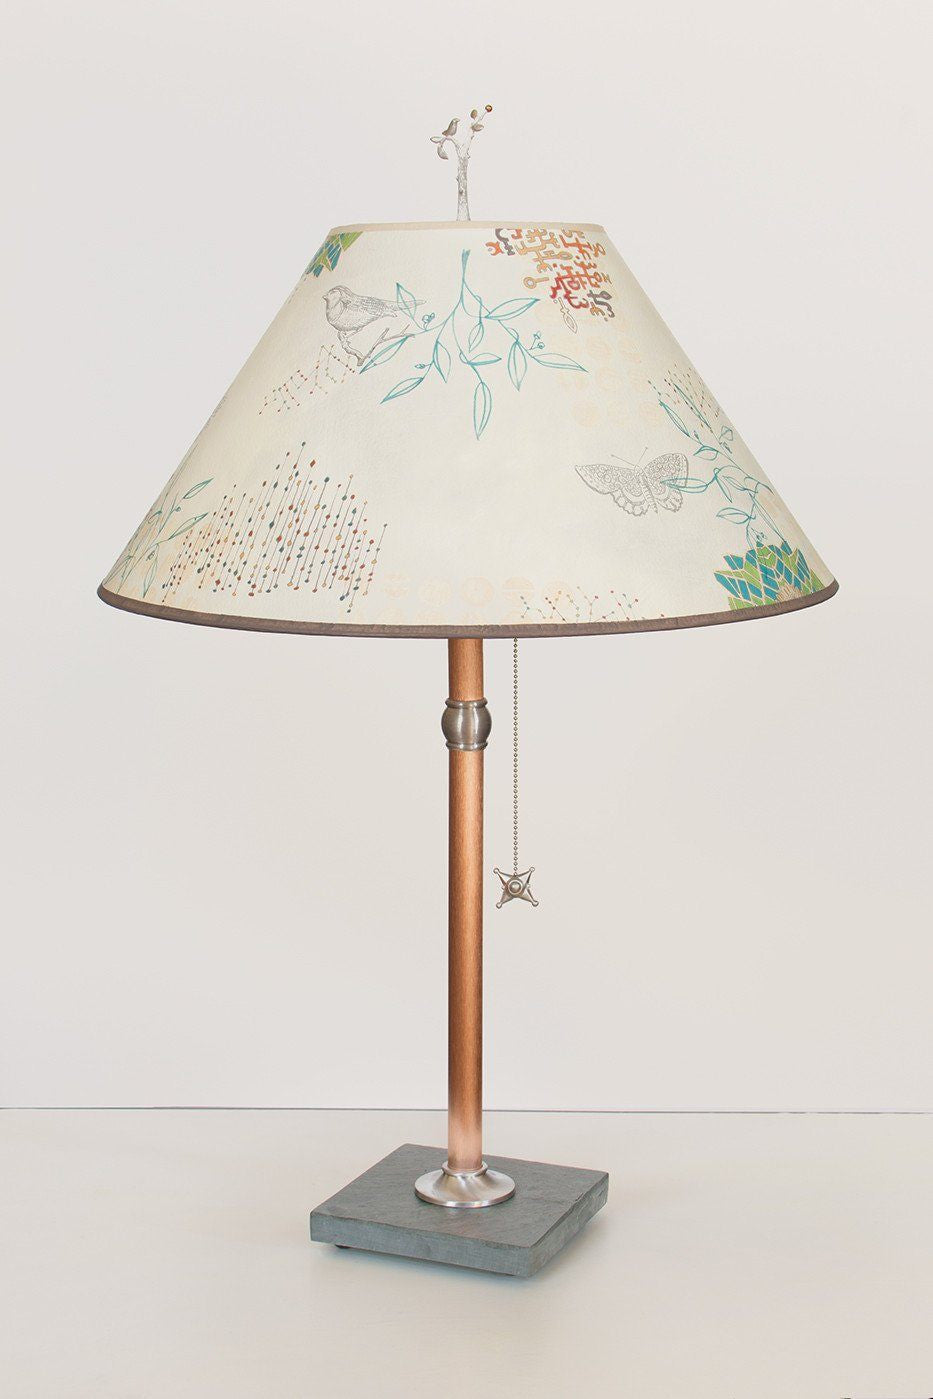 Janna Ugone & Co Table Lamps Copper Table Lamp with Large Conical Shade in Ecru Journey